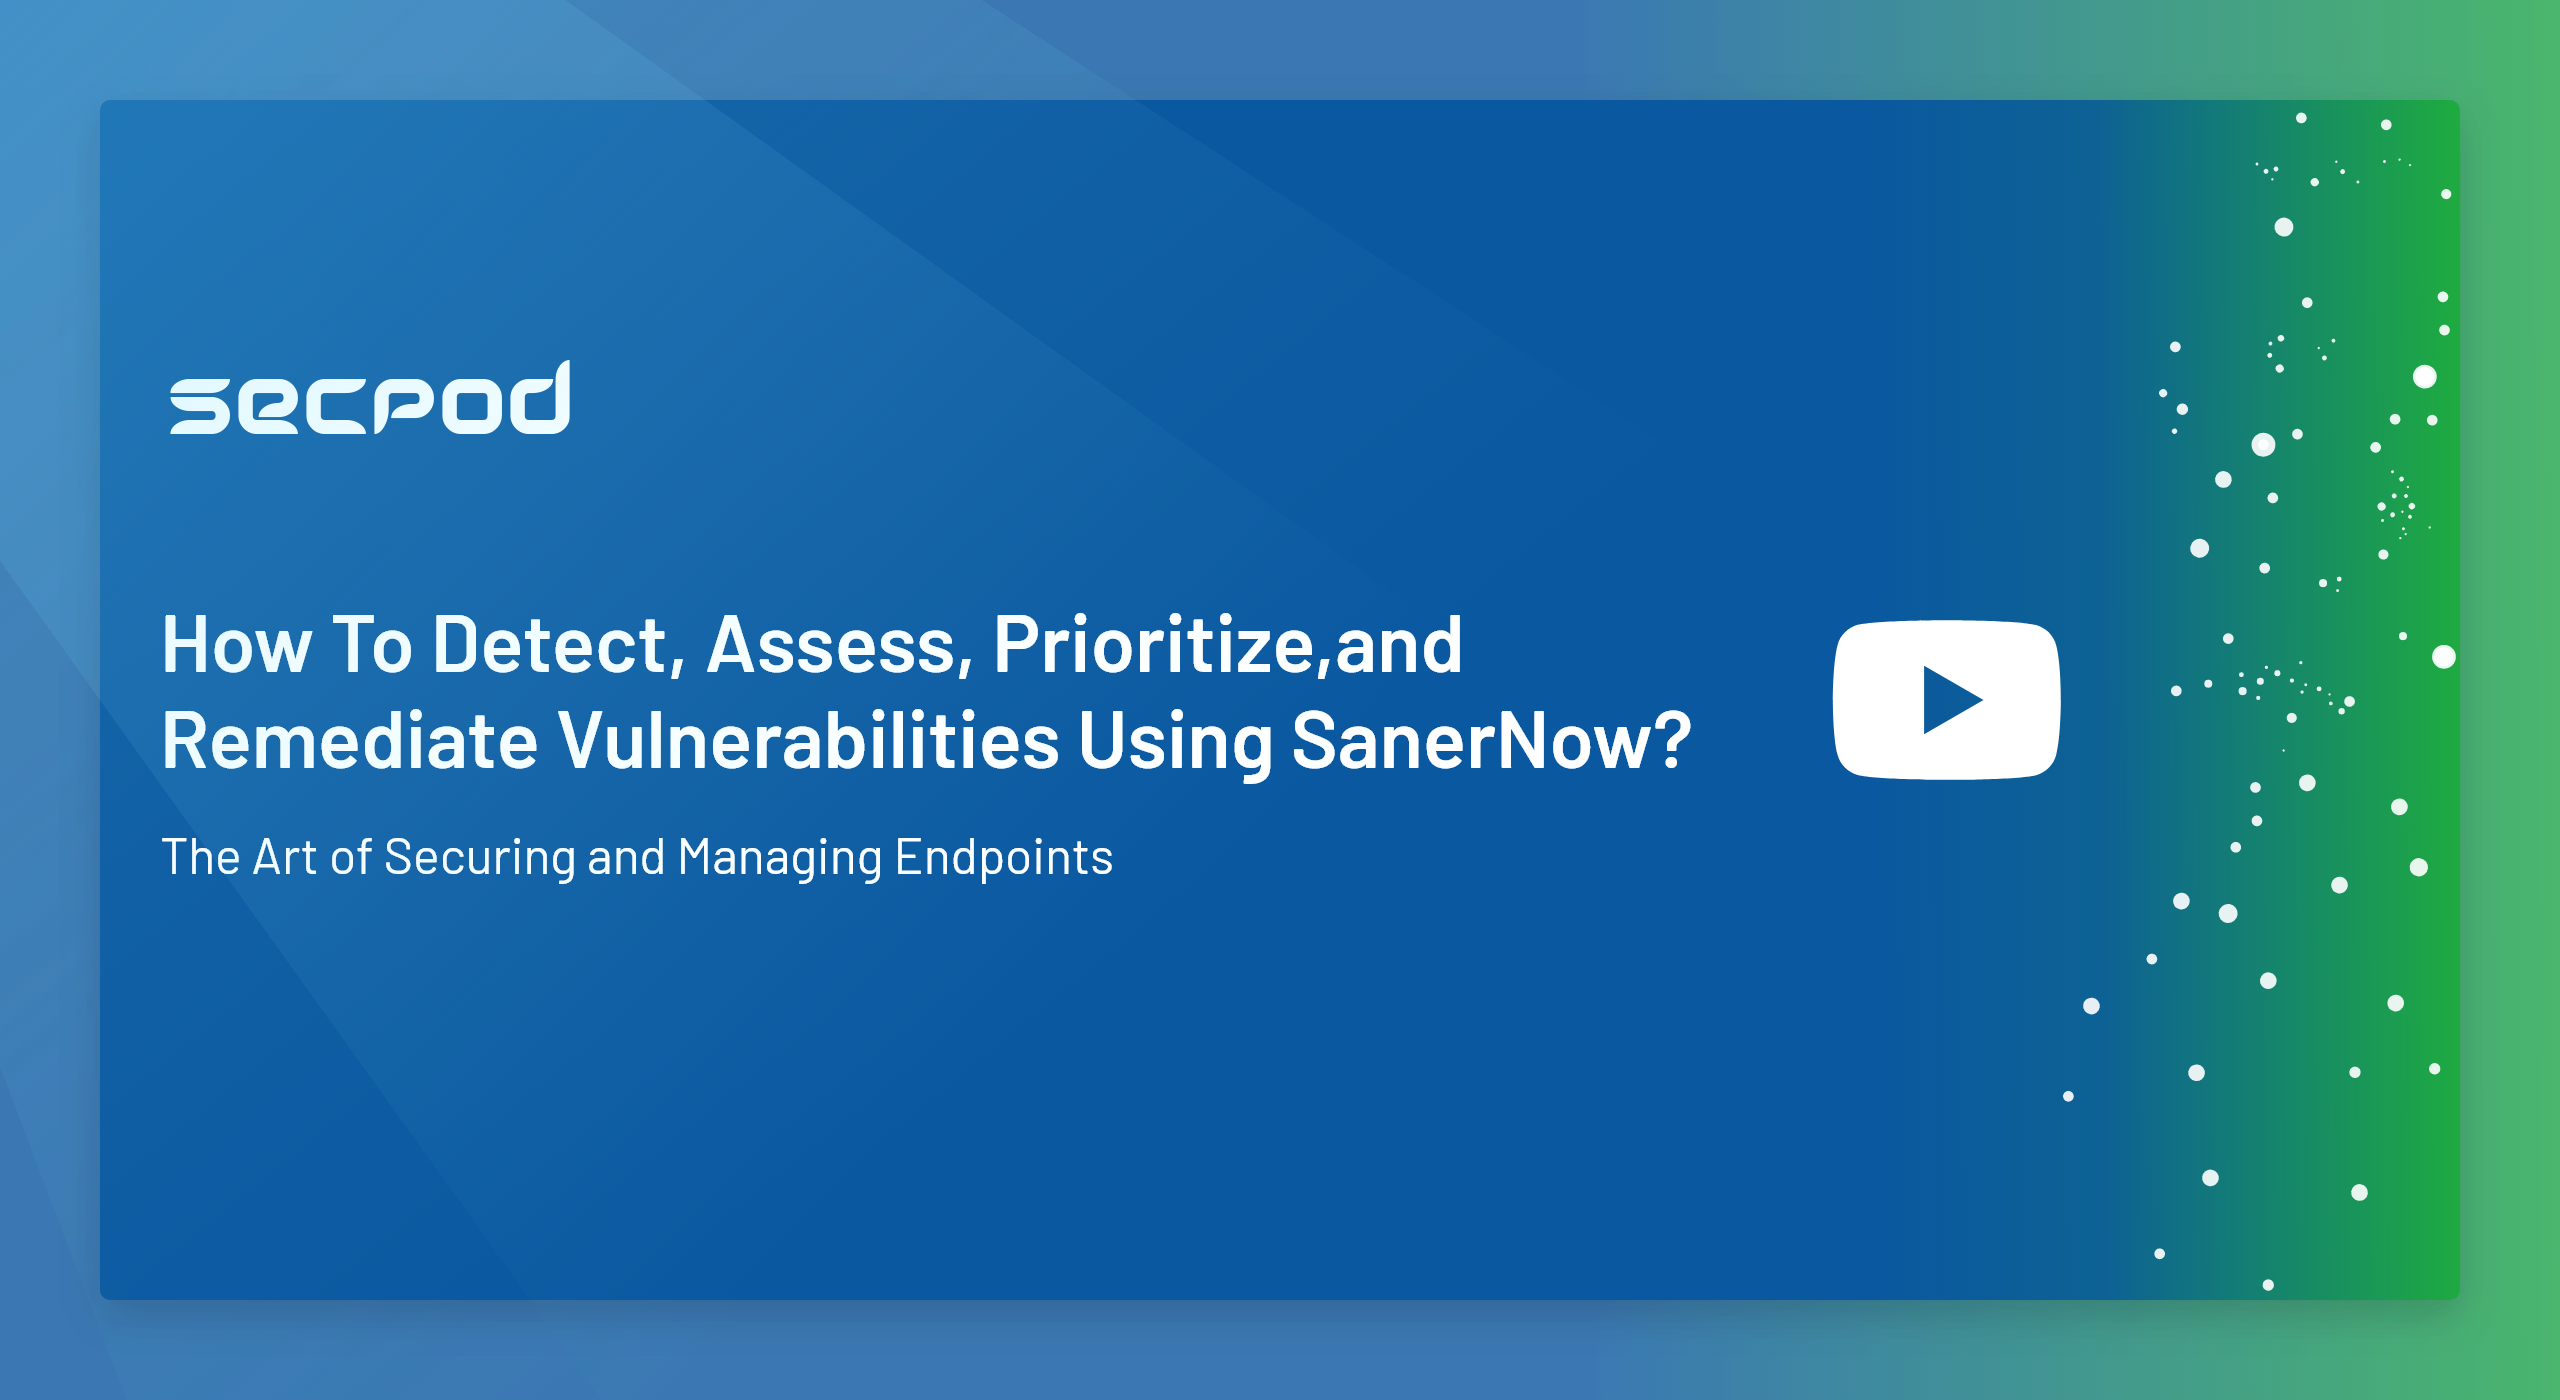 SanerNow Product Series – Chapter 3 – How to Detect, Assess, Prioritize, and Remediate Vulnerabilities using SanerNow